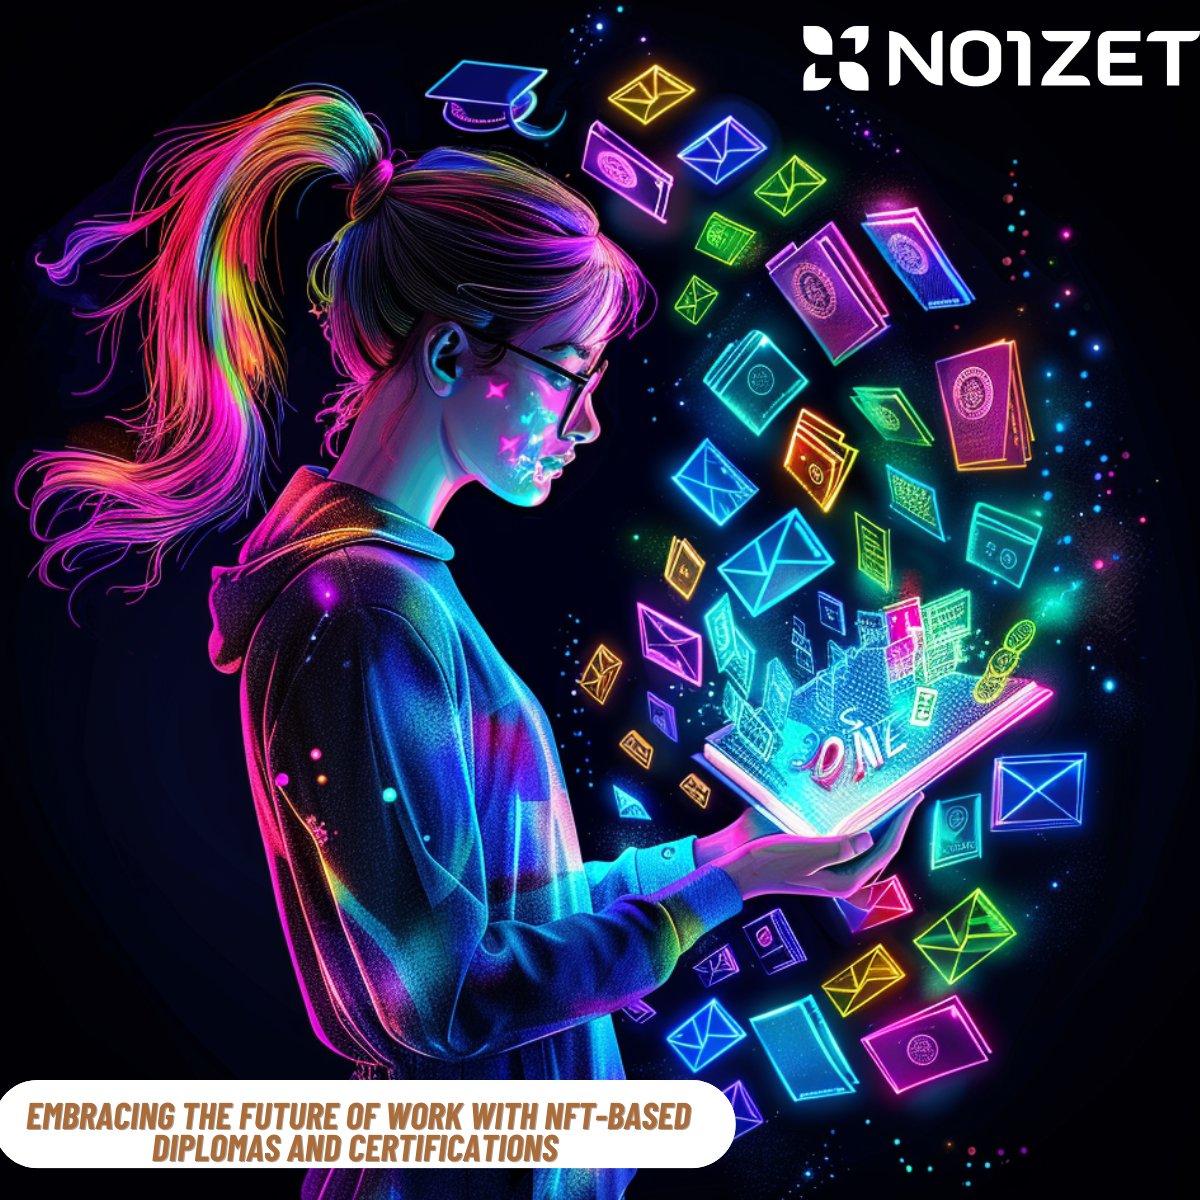 🚀 Embracing the #FutureOfWork with NFT-based diplomas! 🎓 
#N01zet is leading the charge in transforming how professional credentials are managed and verified. Secure, global, and eco-friendly! 🌍 #DigitalCredentials #NFTRevolution

🔗 Secure, own, and share your achievements…